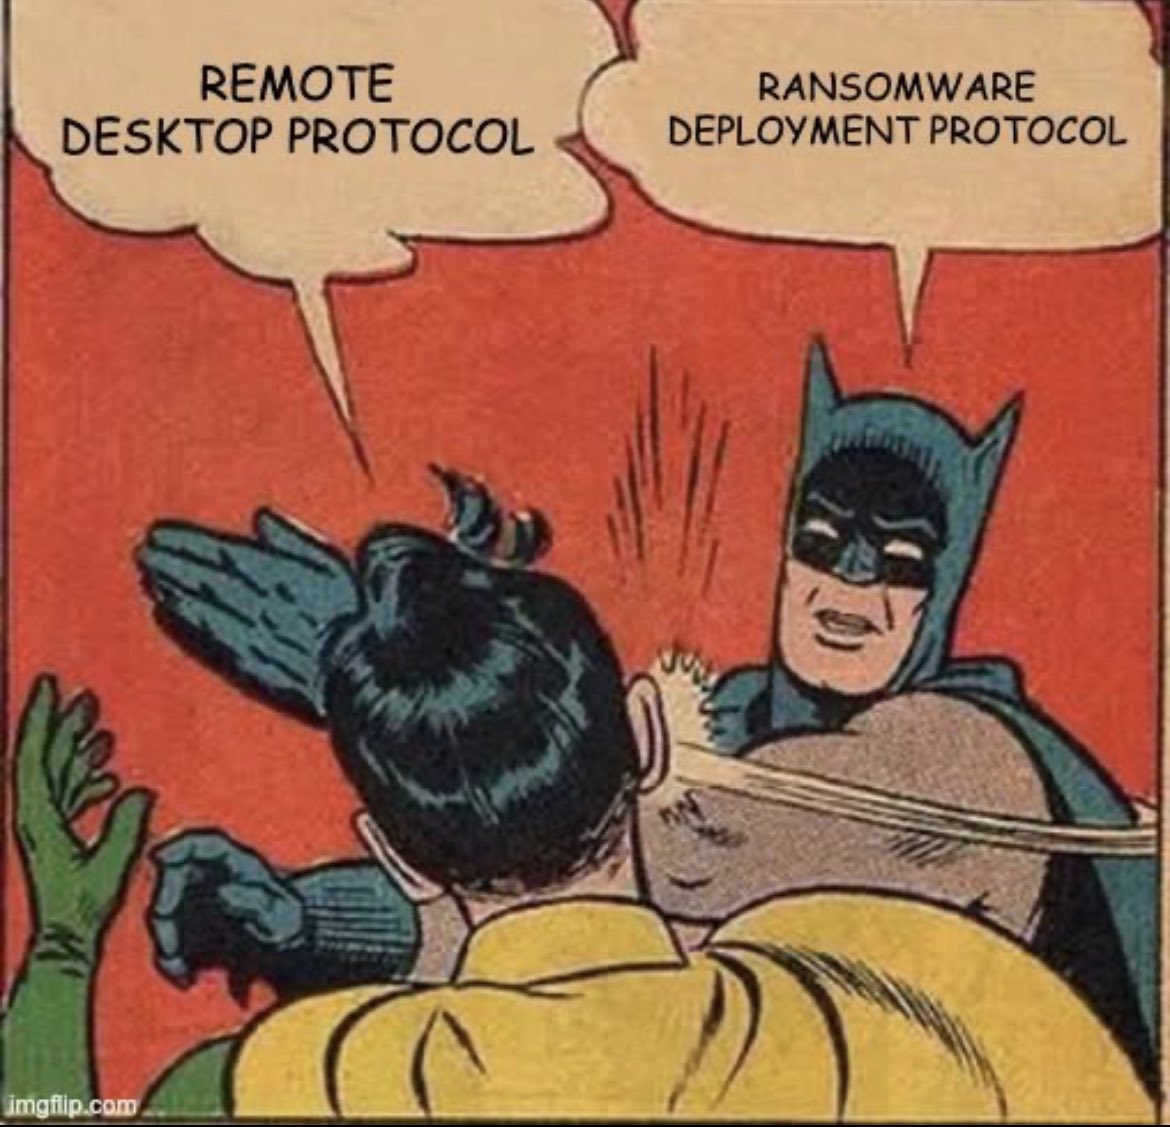 A meme of Robin saying ‘Remote Desktop Protocol’ and Batman slapping him to correct that it should be ‘Ransomware Deployment Protocol’